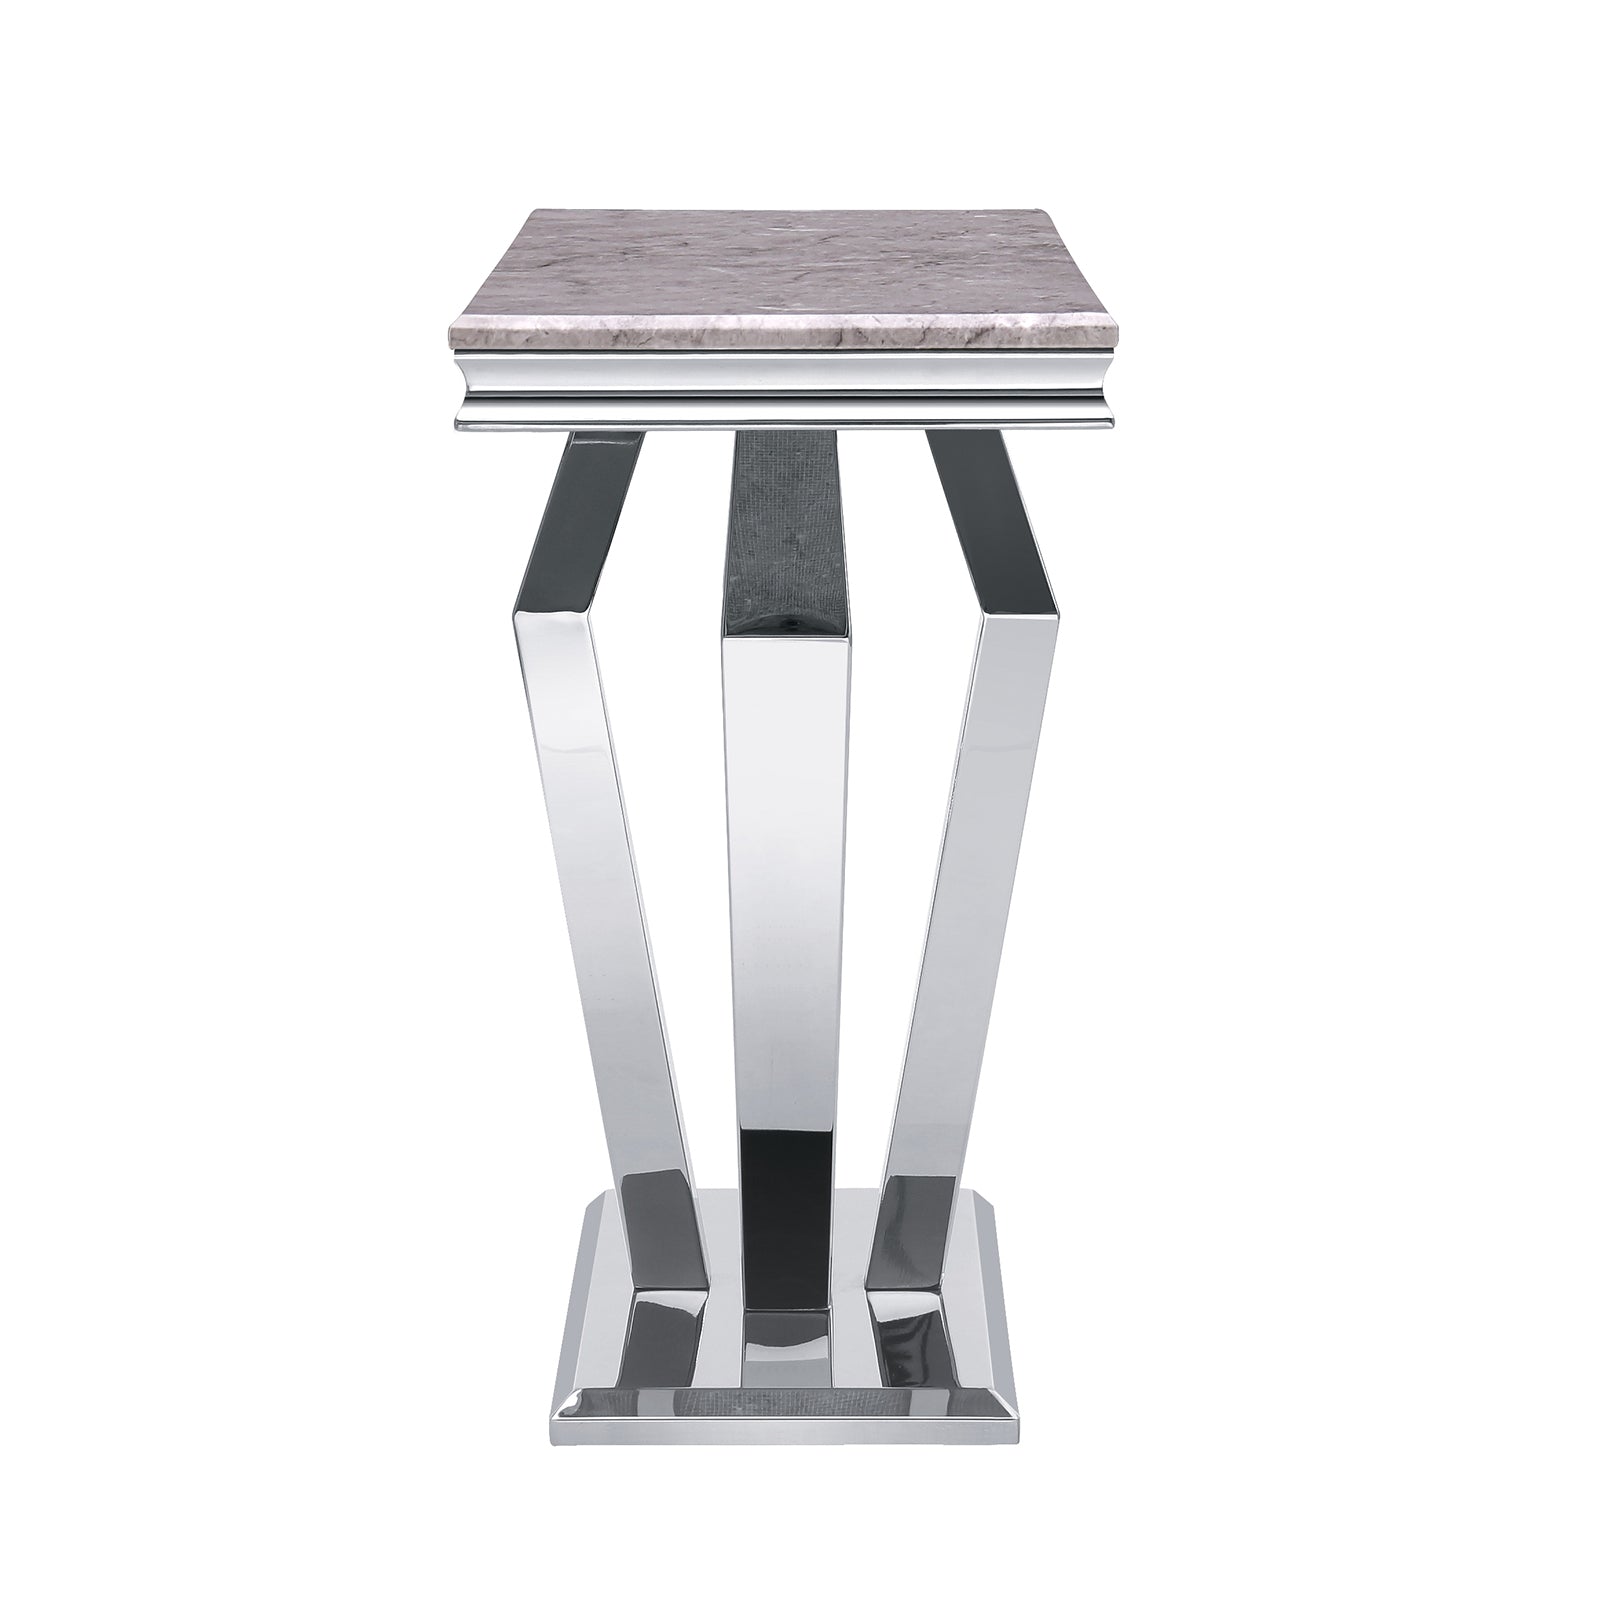 Silver Sofa Table with metal Geometric Base | S508